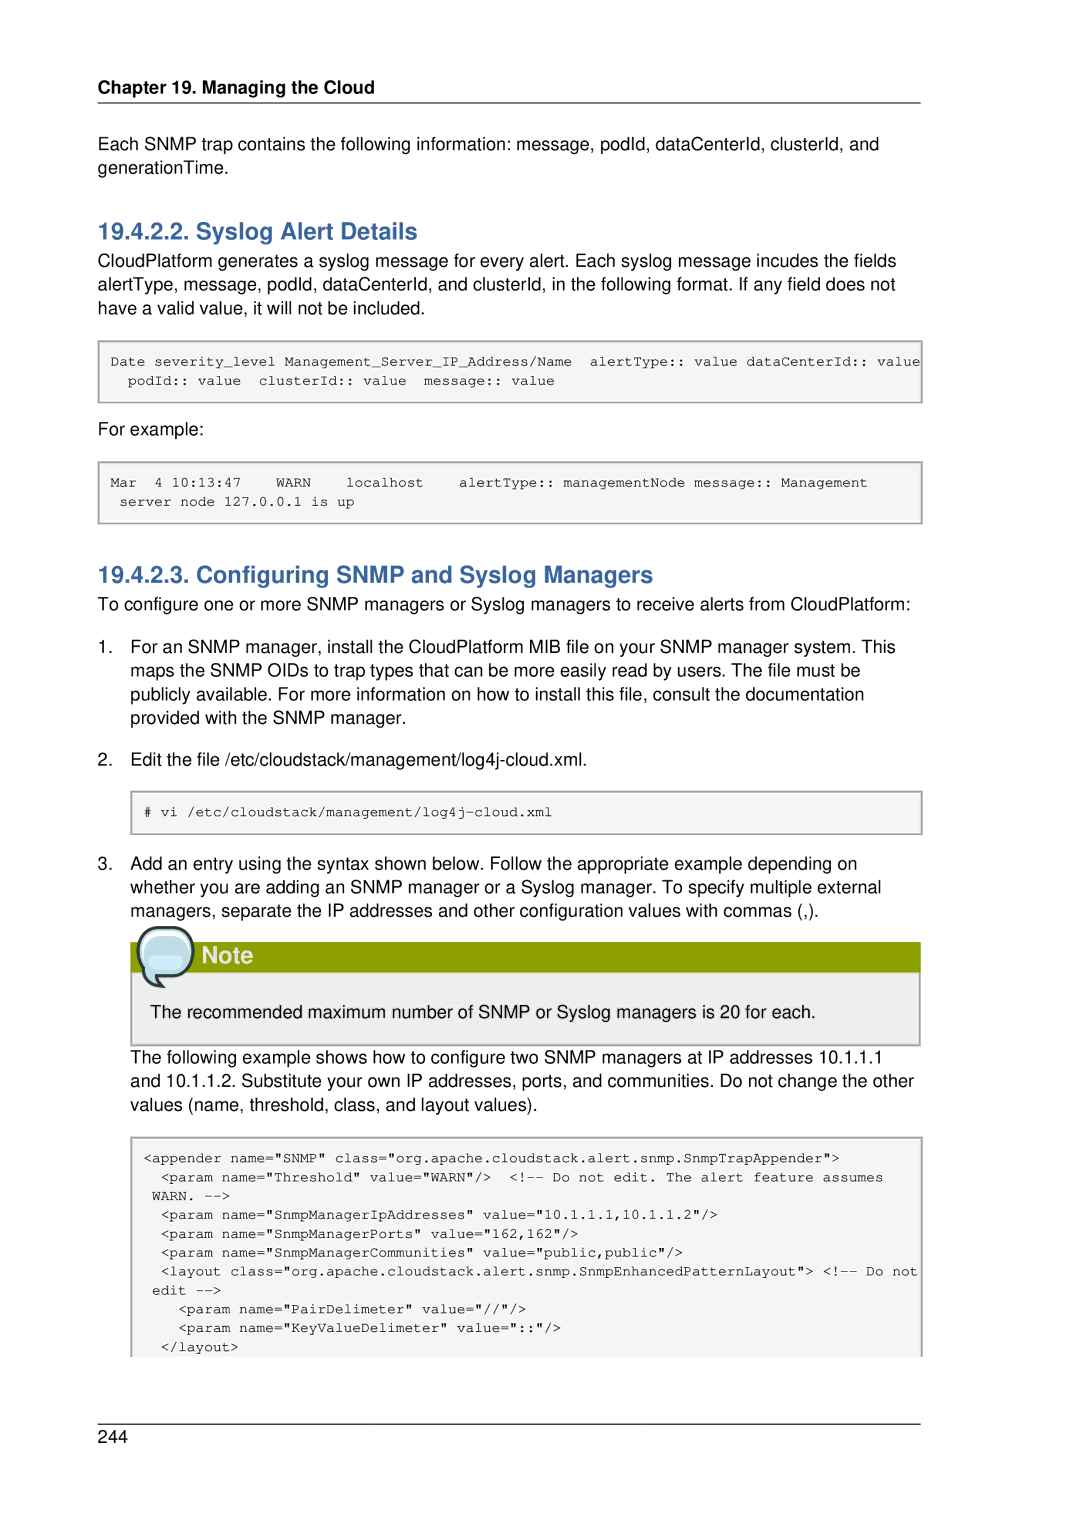 Citrix Systems 4.2 manual Syslog Alert Details, Configuring Snmp and Syslog Managers 